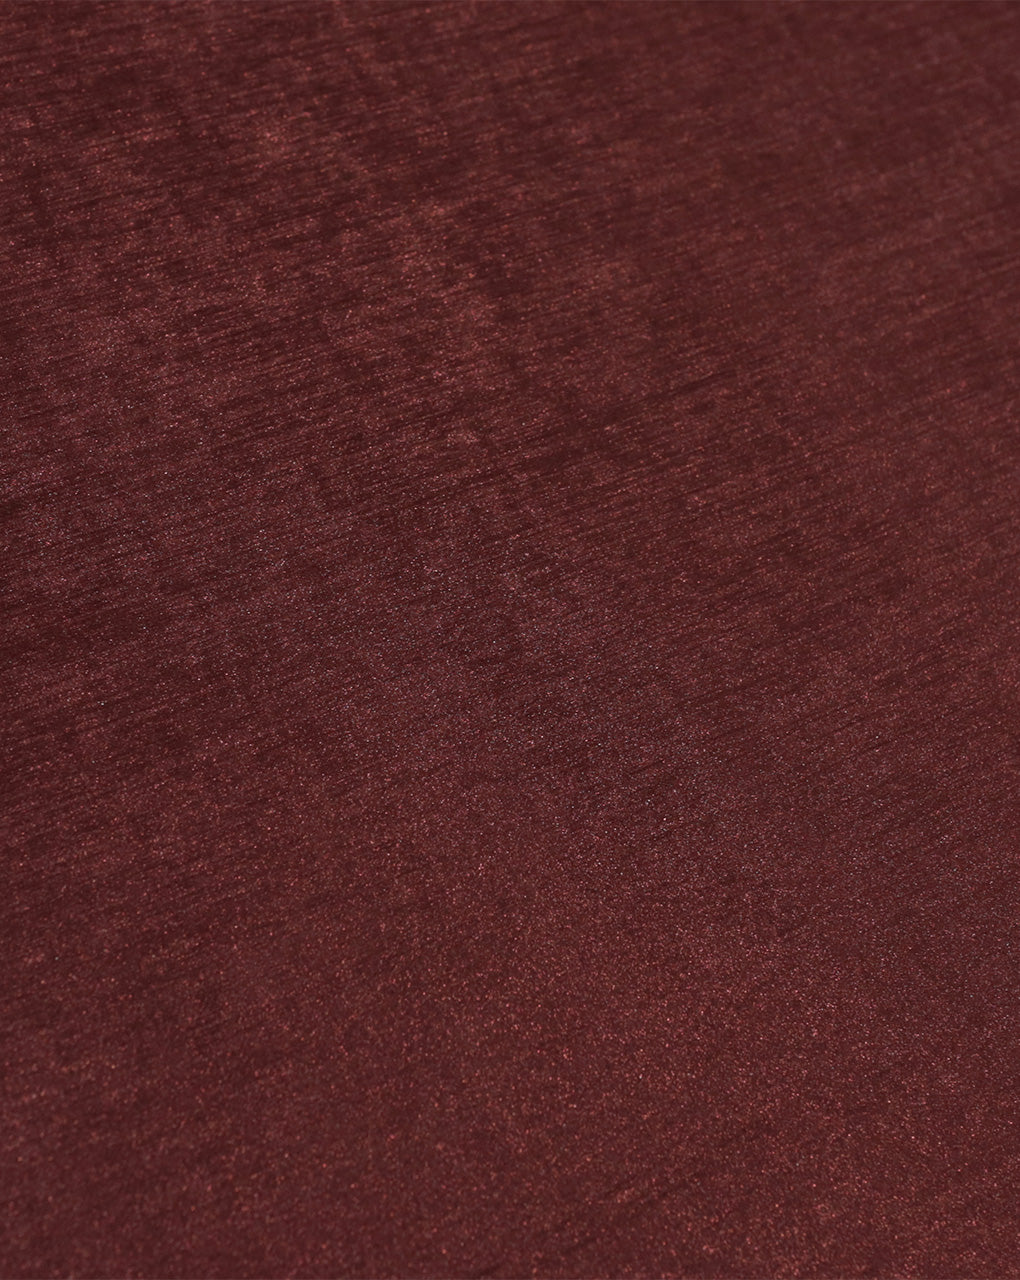 DARK BROWN POLYESTER SATIN FOIL PRINTED FABRIC ( WIDTH 58 INCHES )